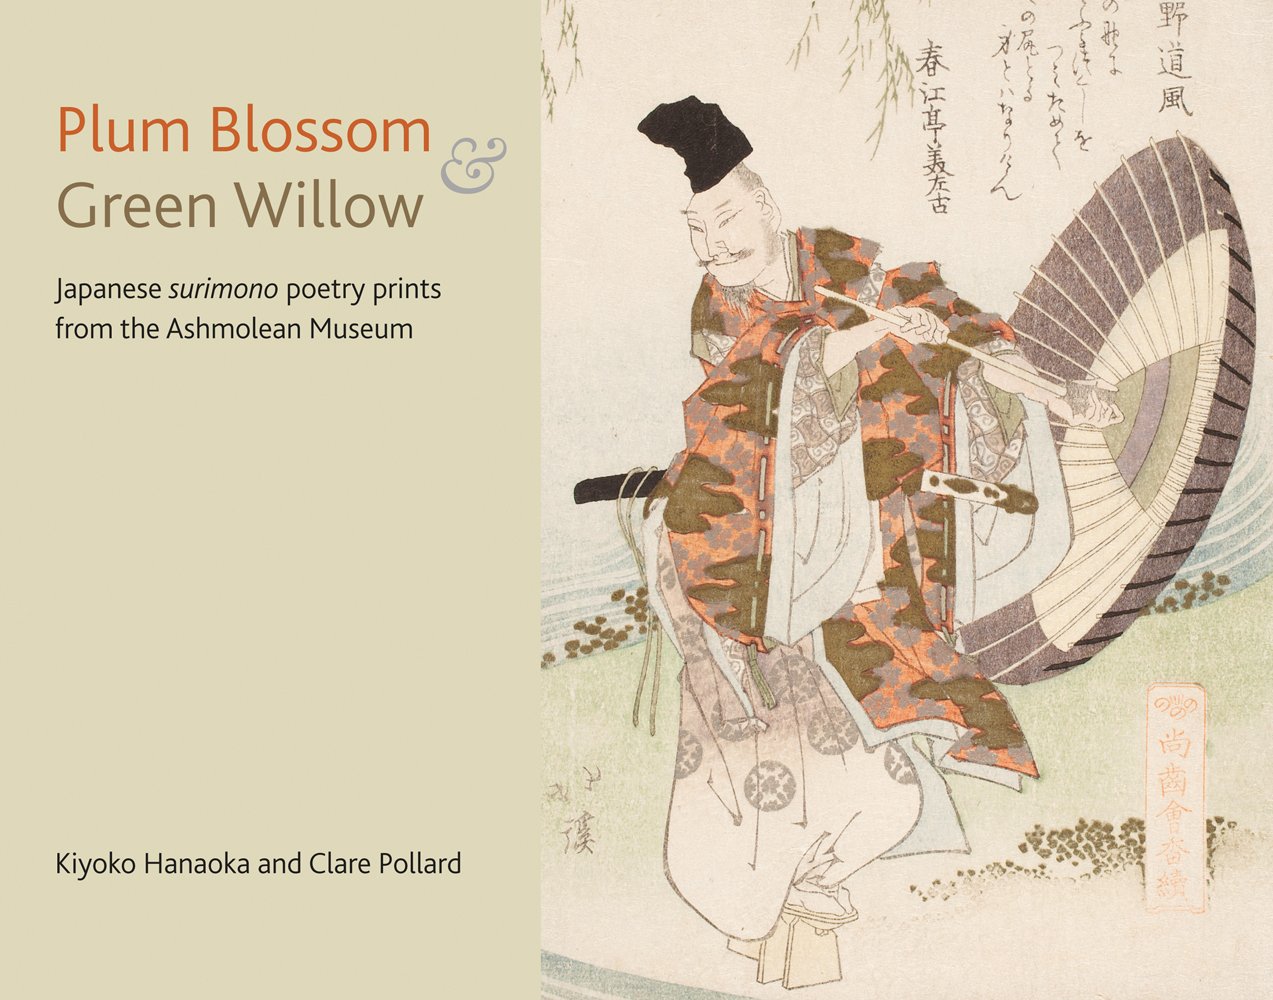 Japanese figure in Yukata, holding a Wagasa, on cover of 'Plum Blossom and Green Willow, Japanese Surimono Poetry Prints from the Ashmolean Museum', by Ashmolean Museum.